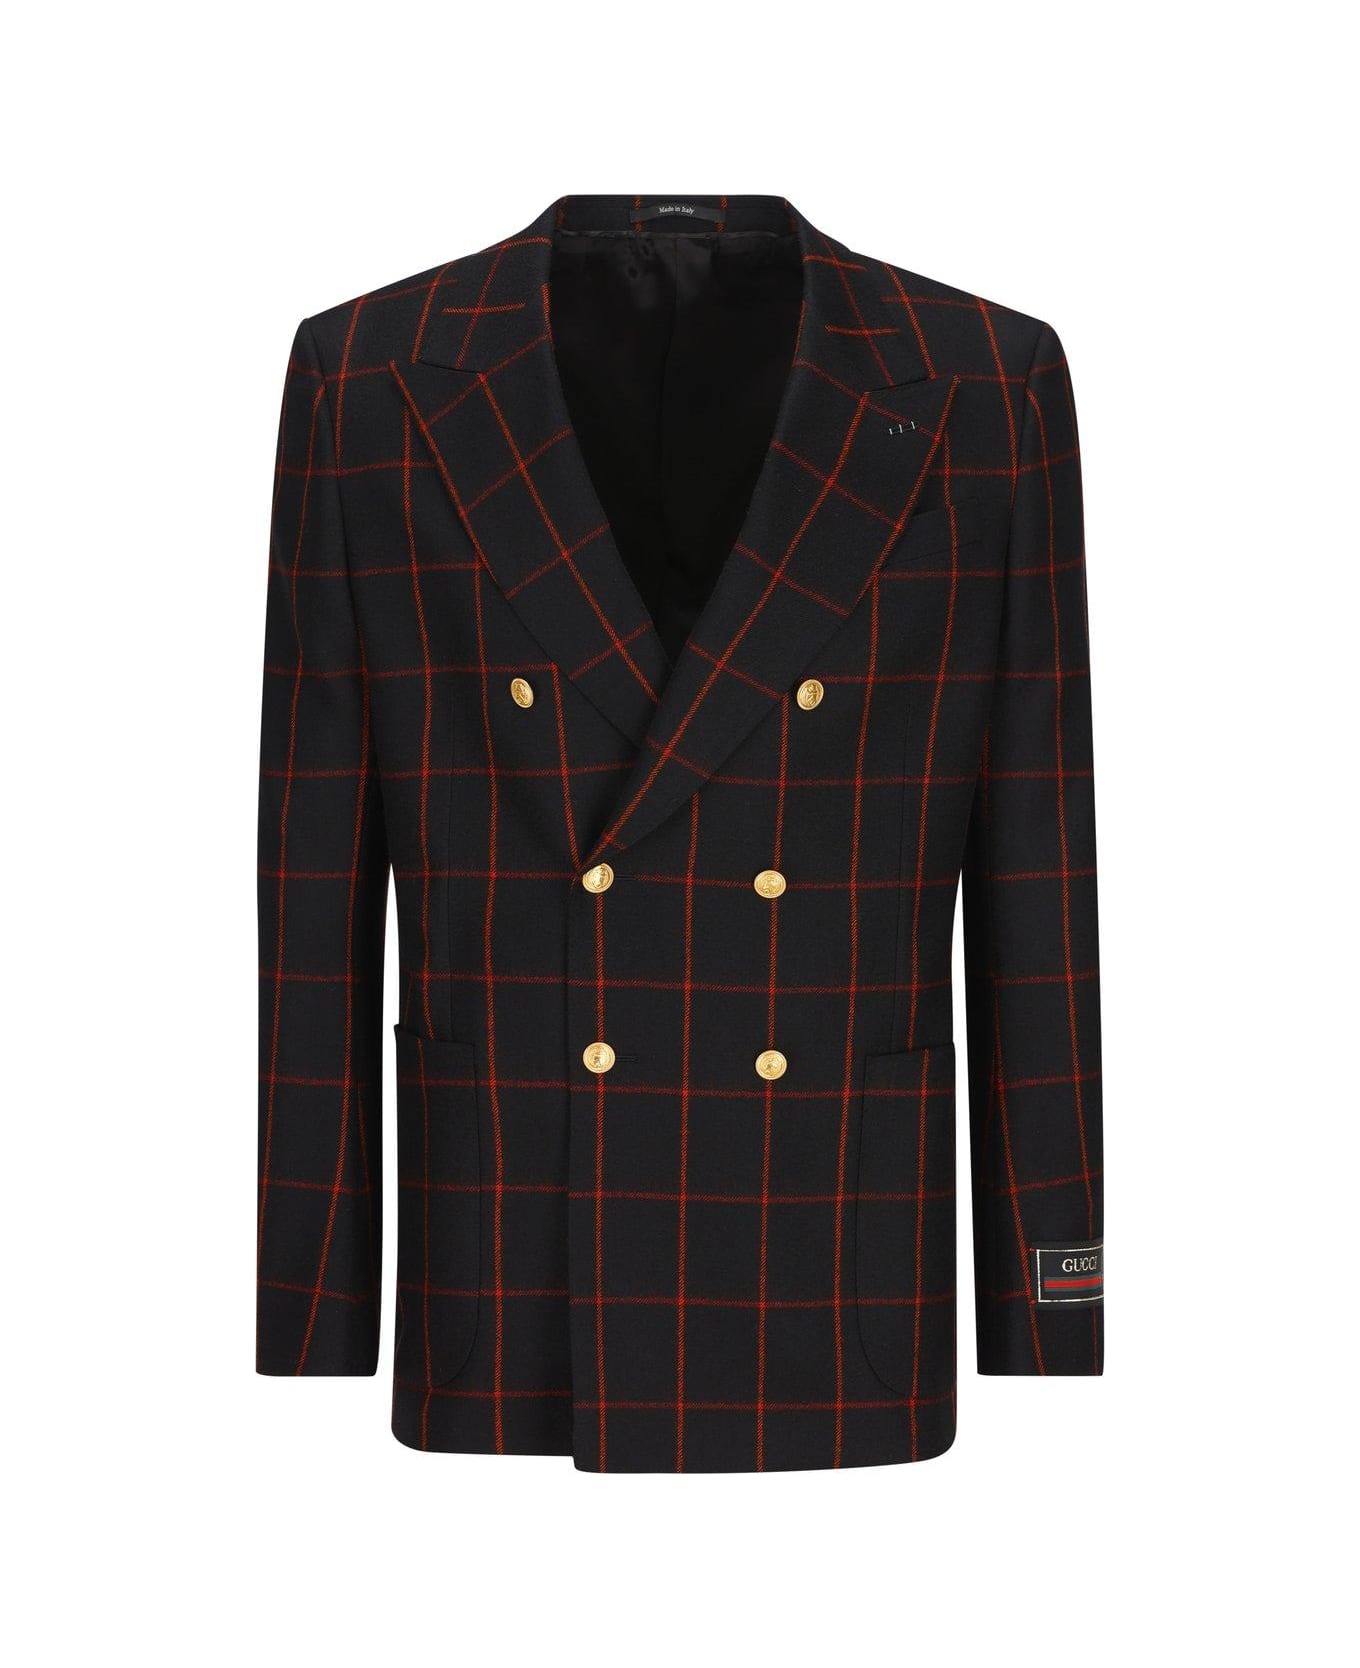 Gucci Checked Double Breasted Jacket ブレザー